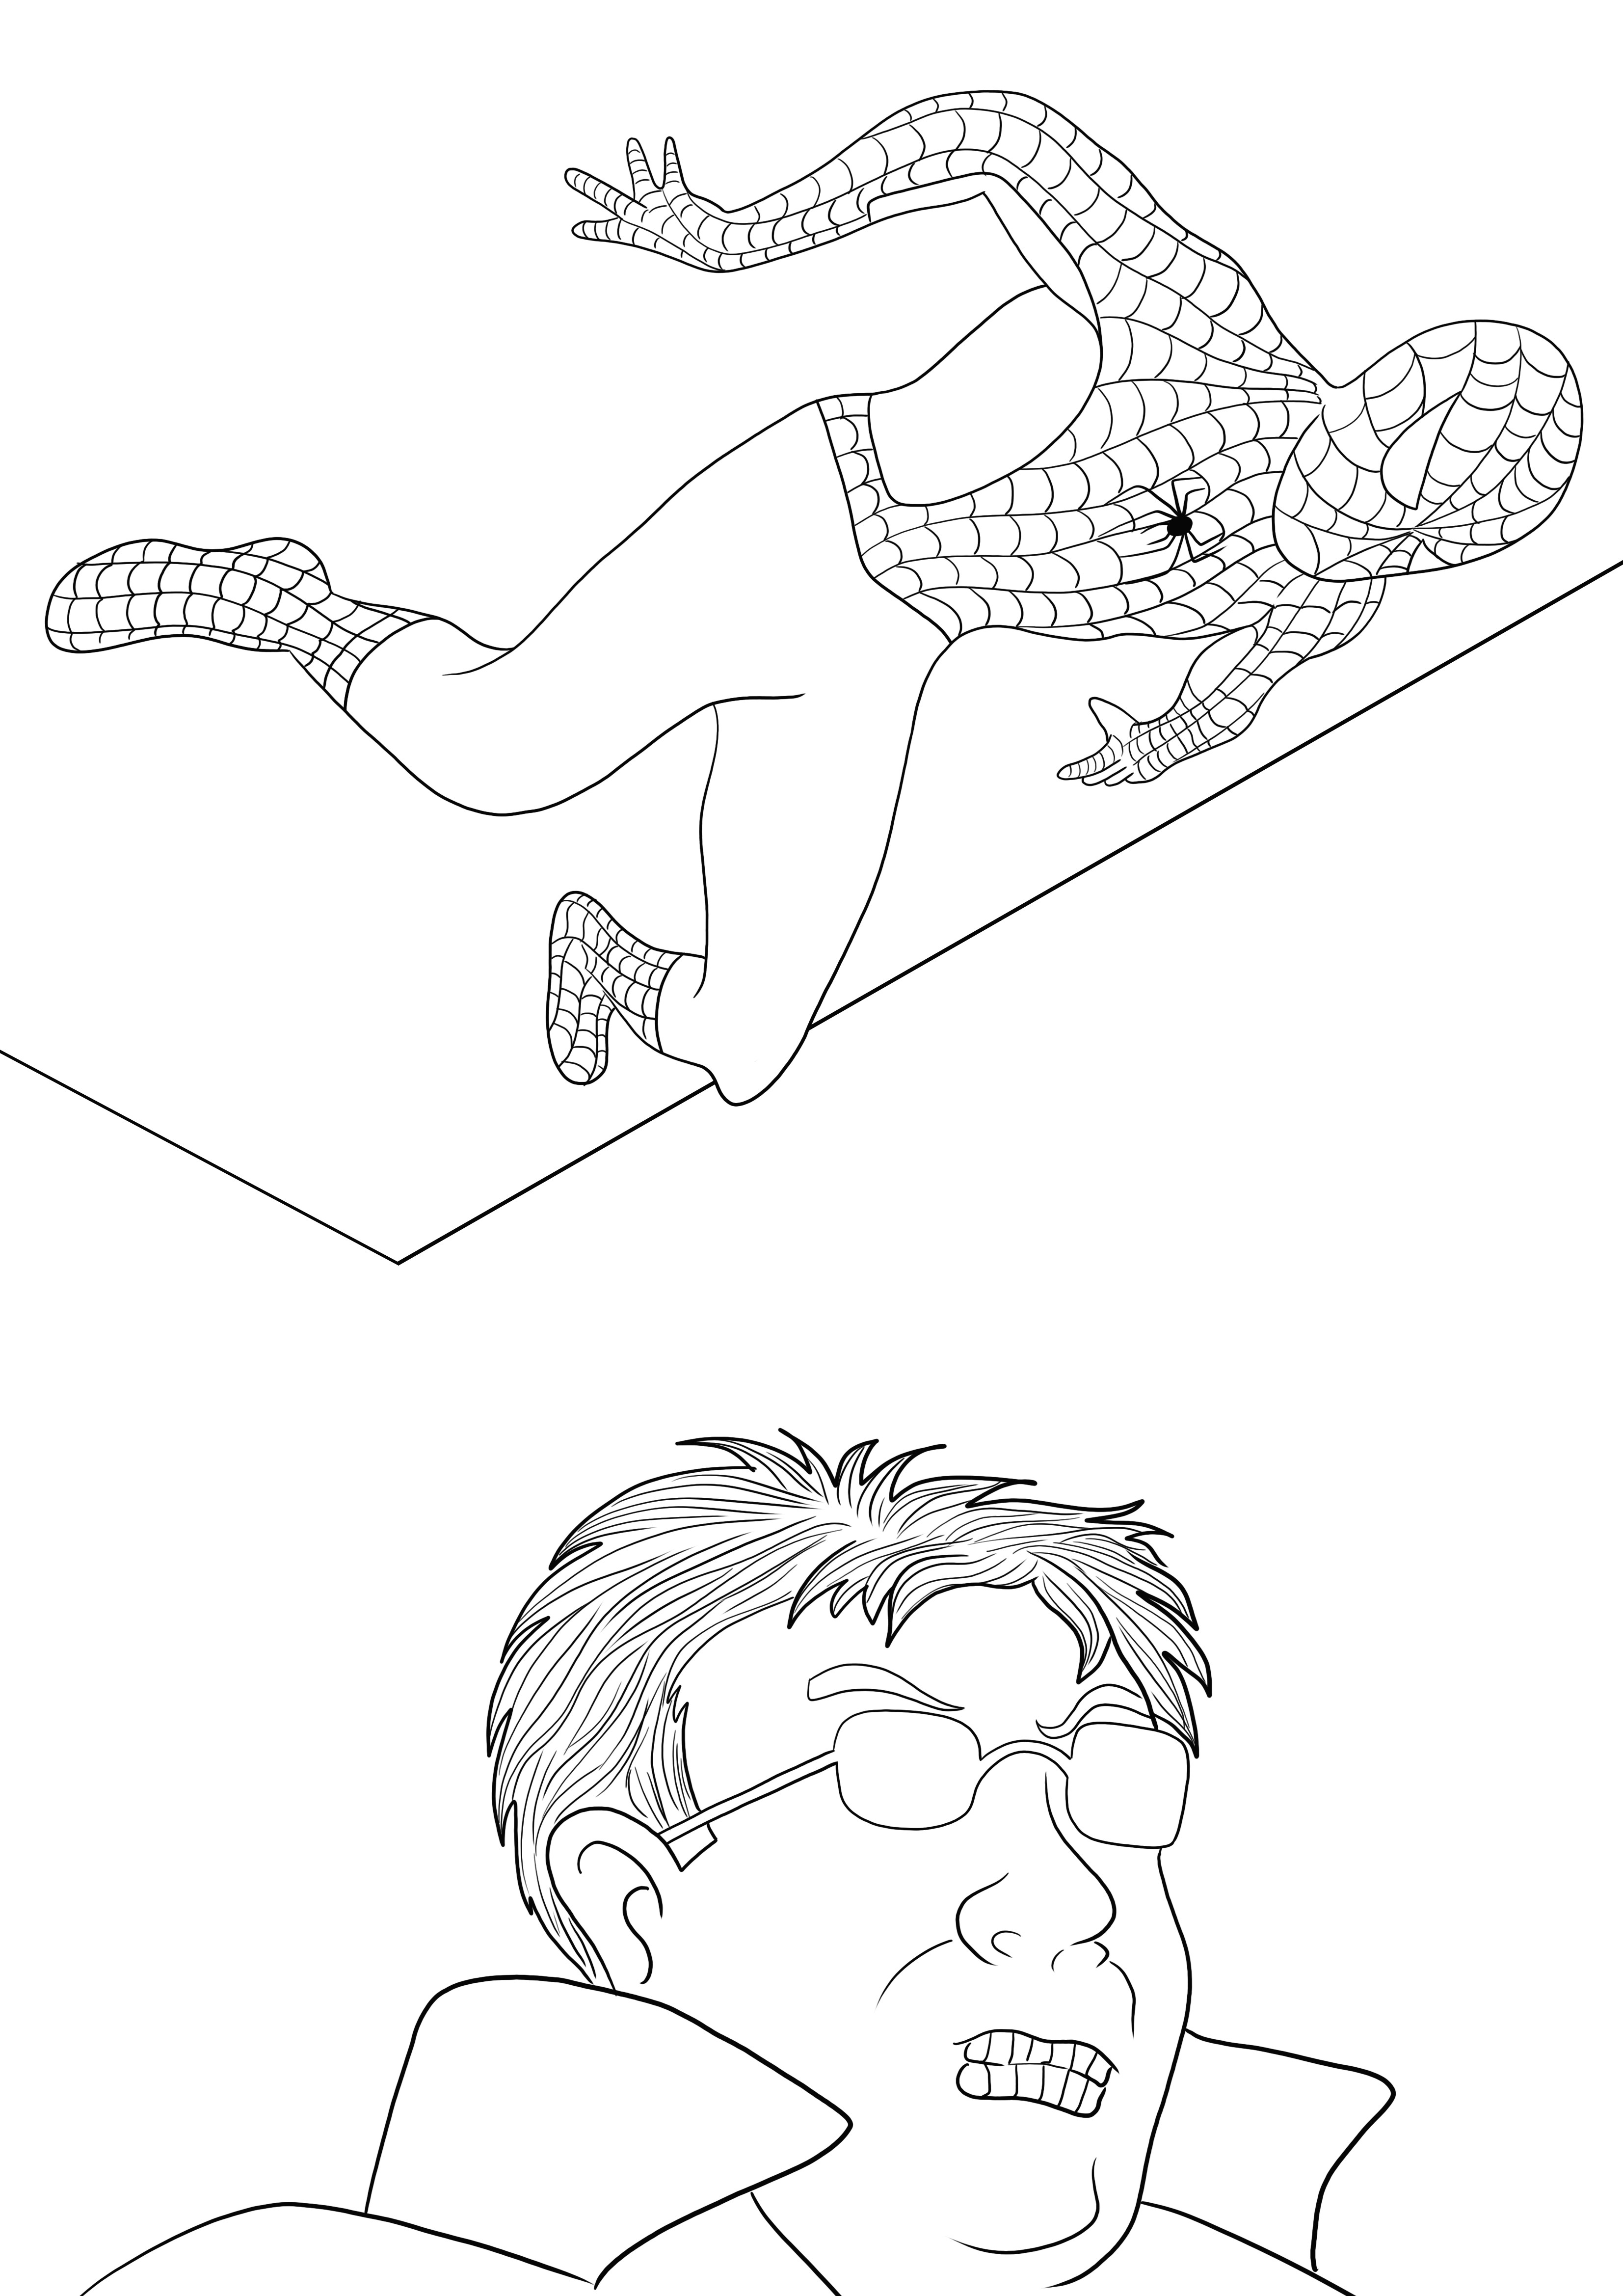 Spiderman Is Hiding on the ceiling image to print for free and simple to color